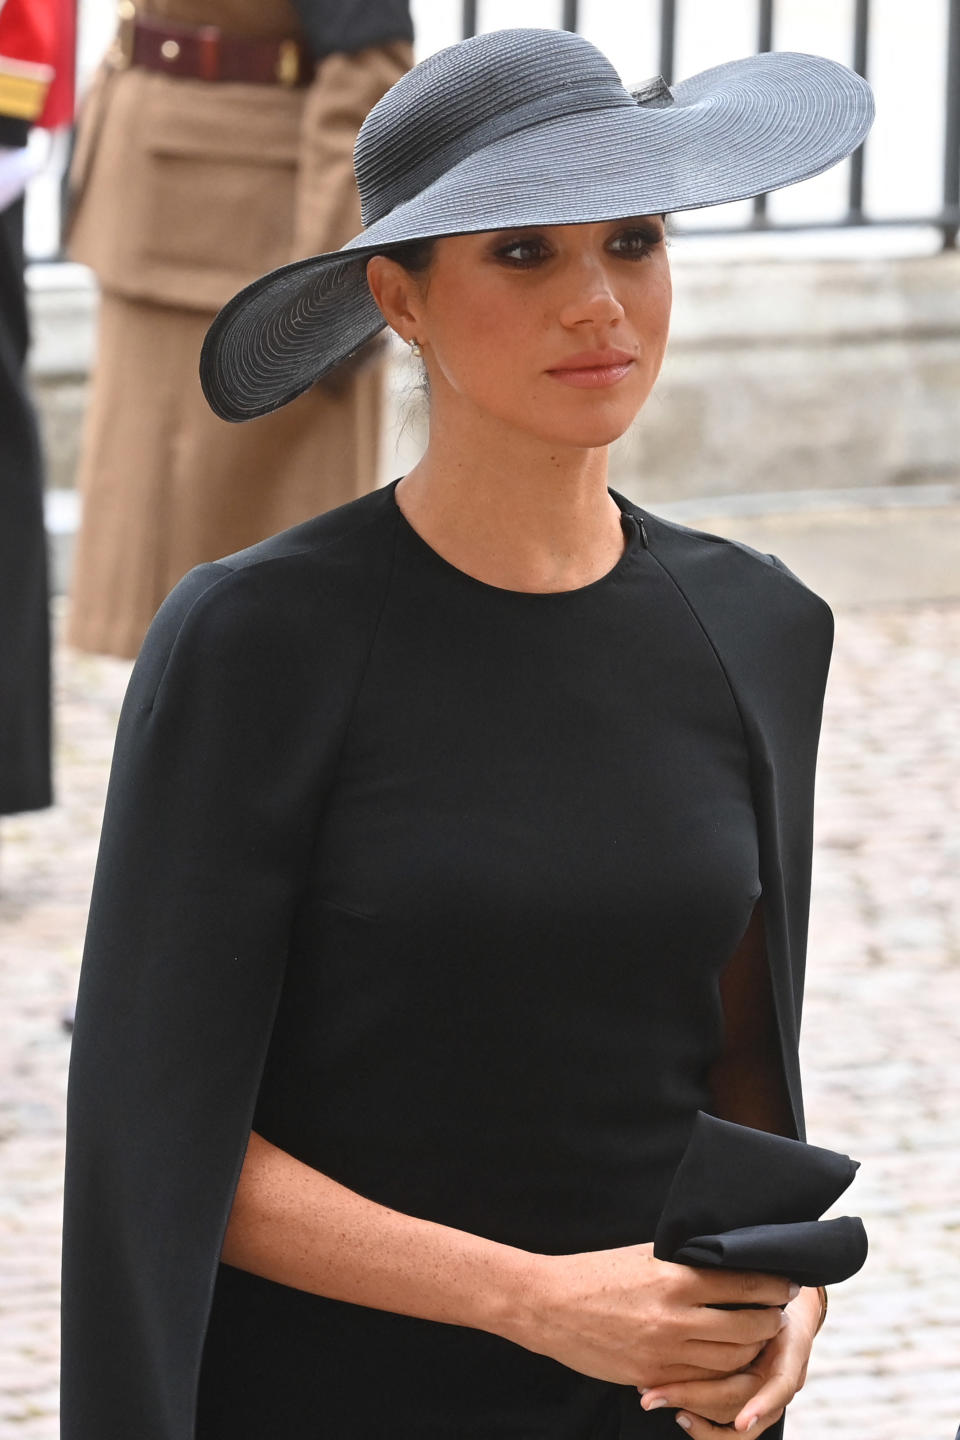 Meghan wears a black dress and black hate as she arrives at Westminster Abbey in London